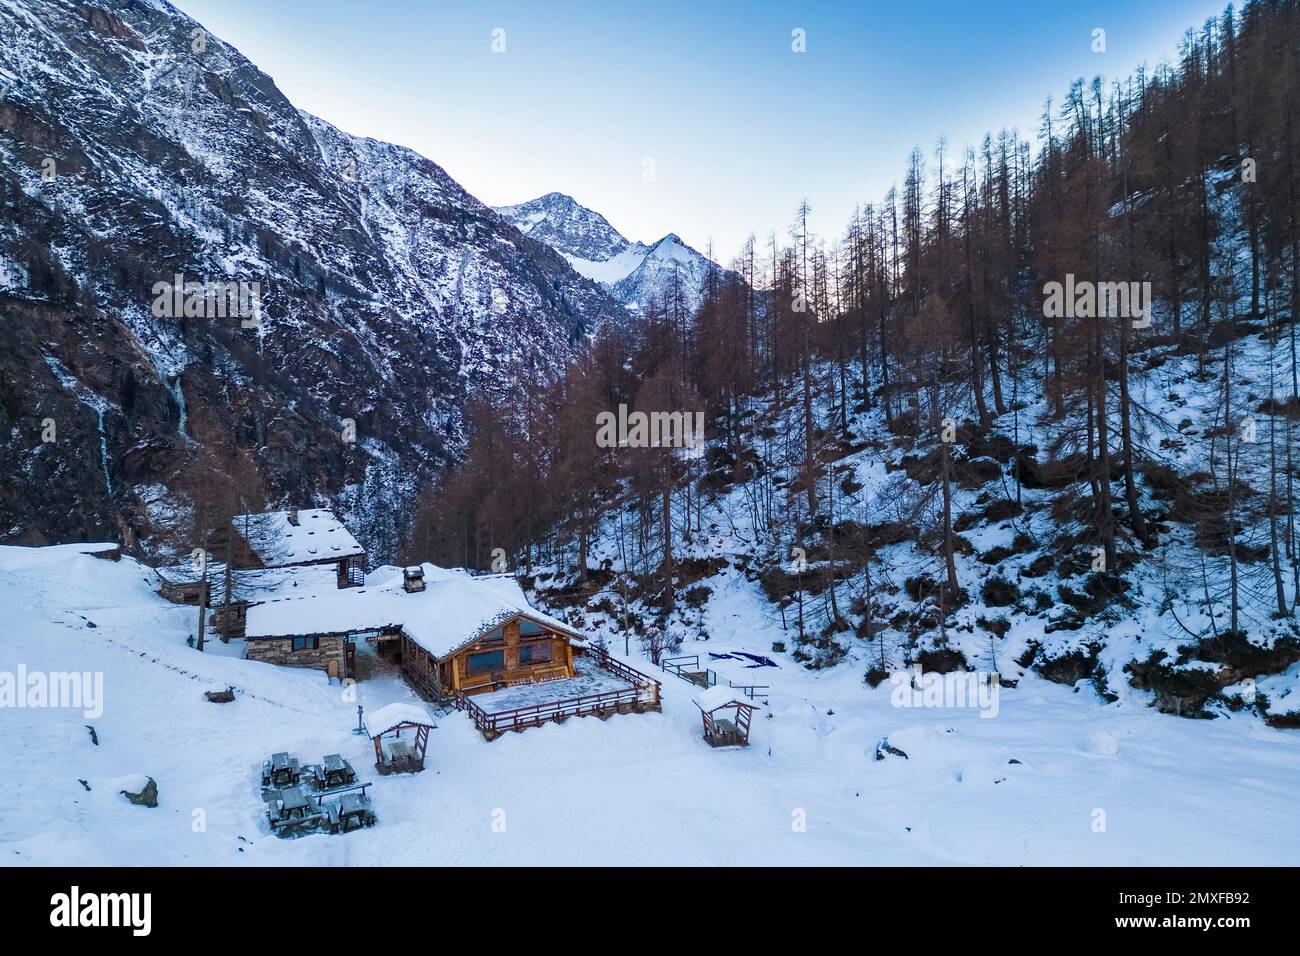 Aerial view of the Pastore Refuge at dawn in winter. Alpe Pile, Alagna, Valsesia, Alagna, Valsesia, Vercelli province, Piedmont, Italy, Europe. Stock Photo